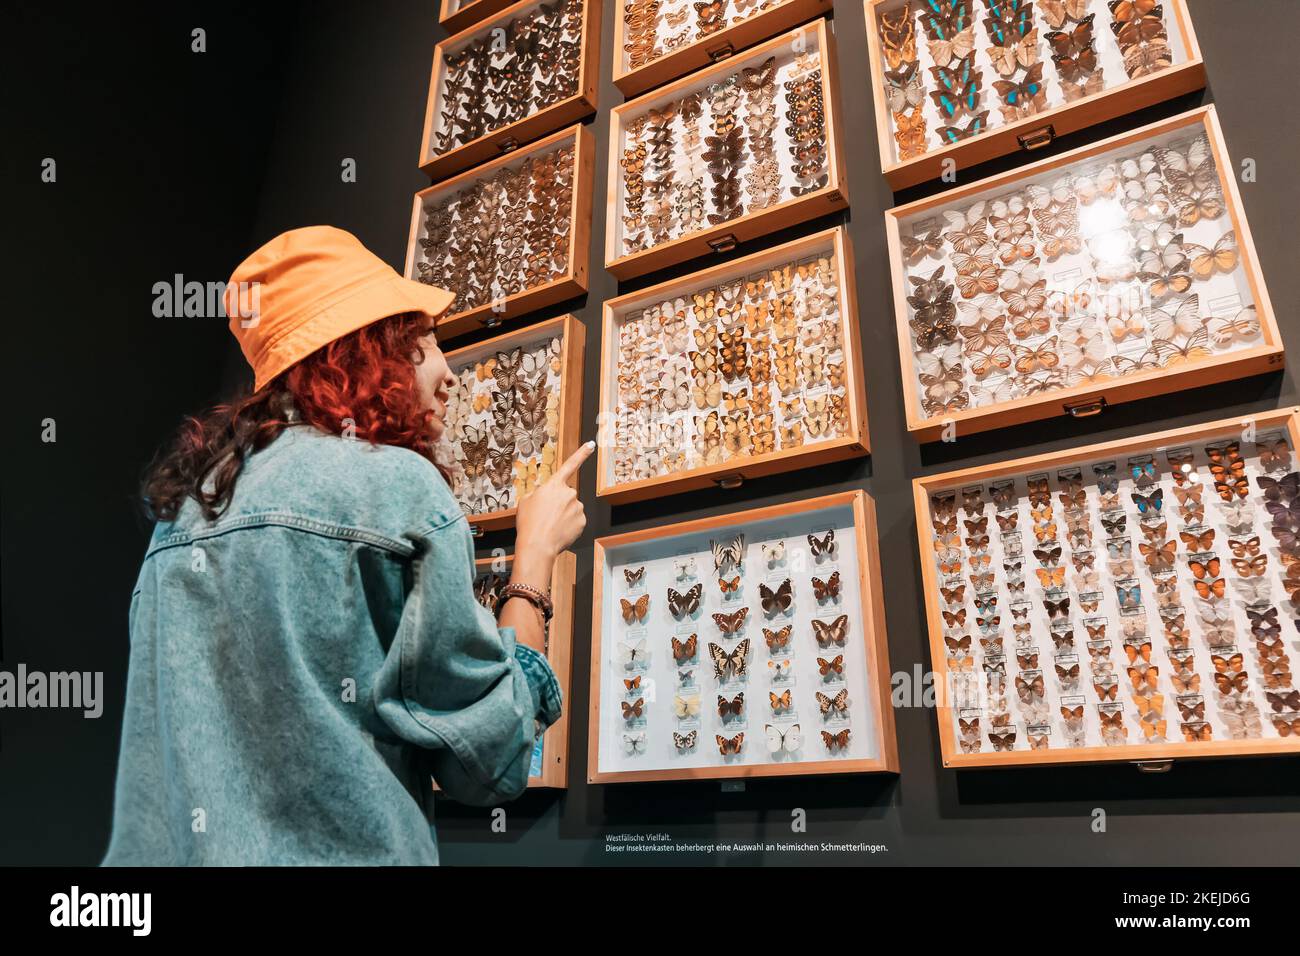 26 July 2022, Munster, Germany: Girl exploring big Butterfly collection on display at the museum, entomology and hobby concept Stock Photo